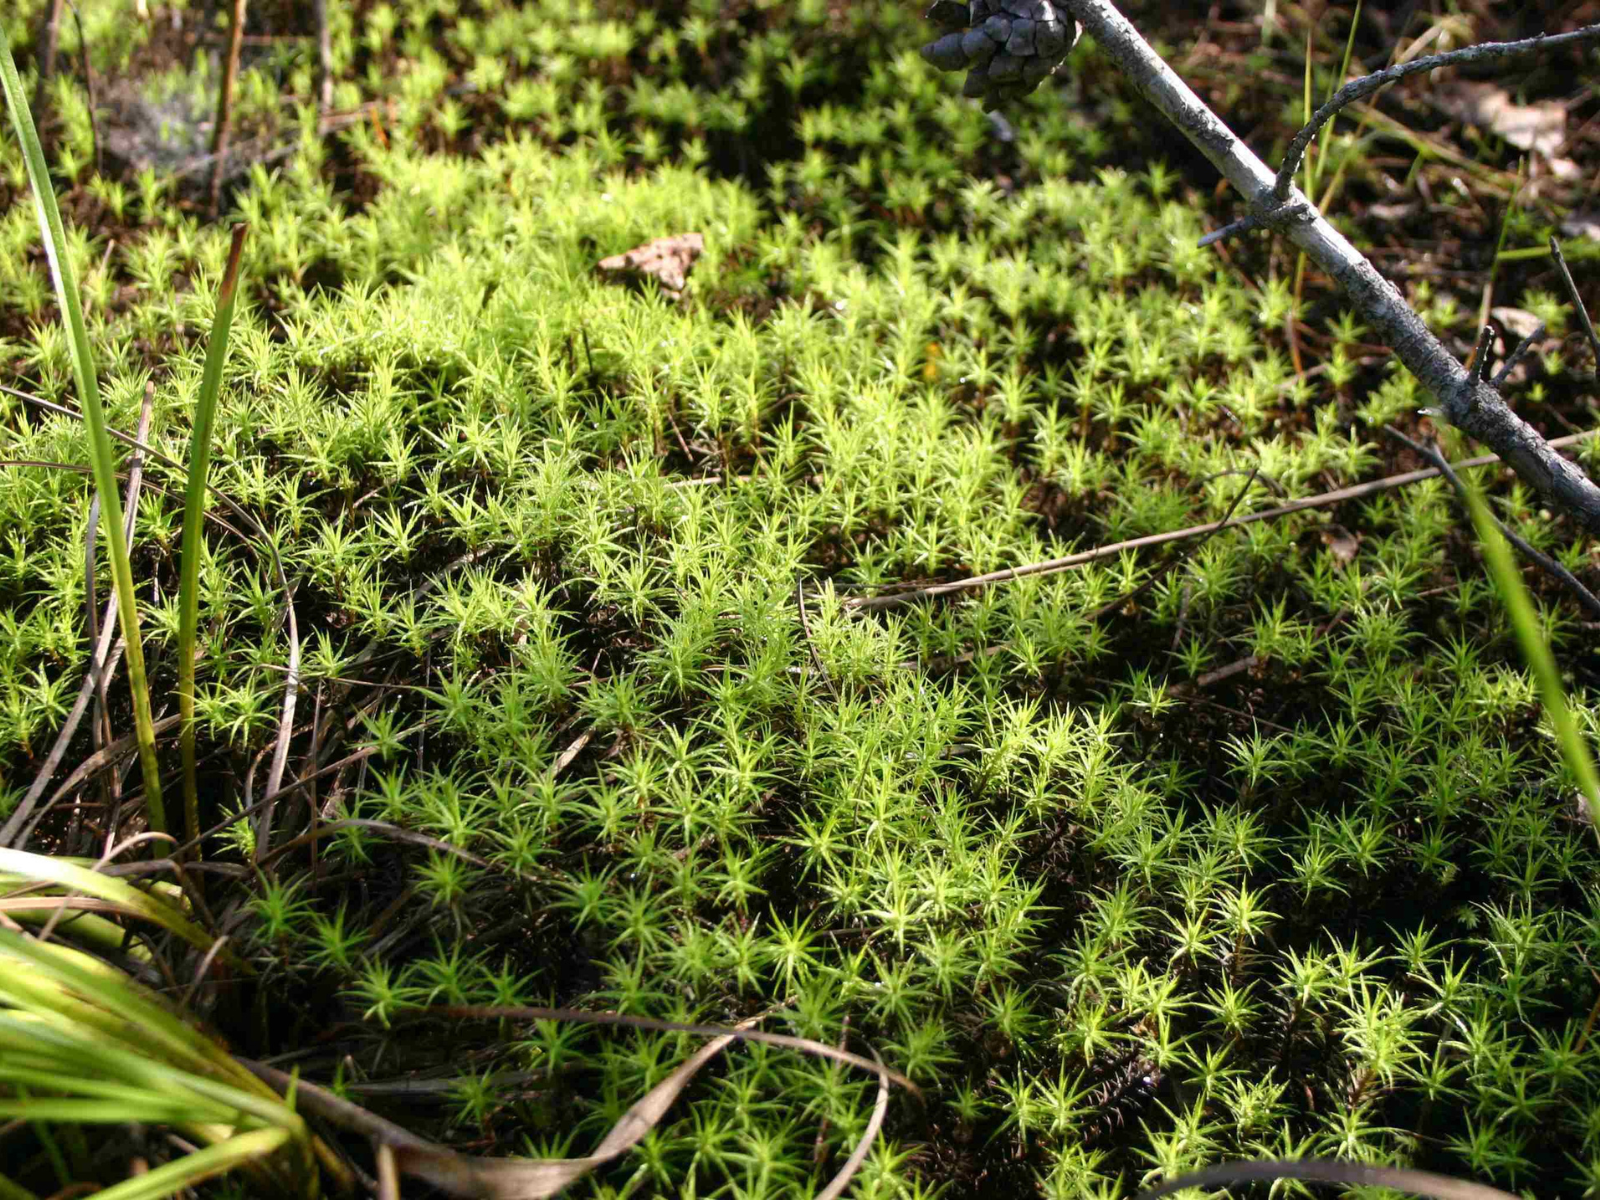 Close-up on a portion of bright green moss growing on the forest floor.